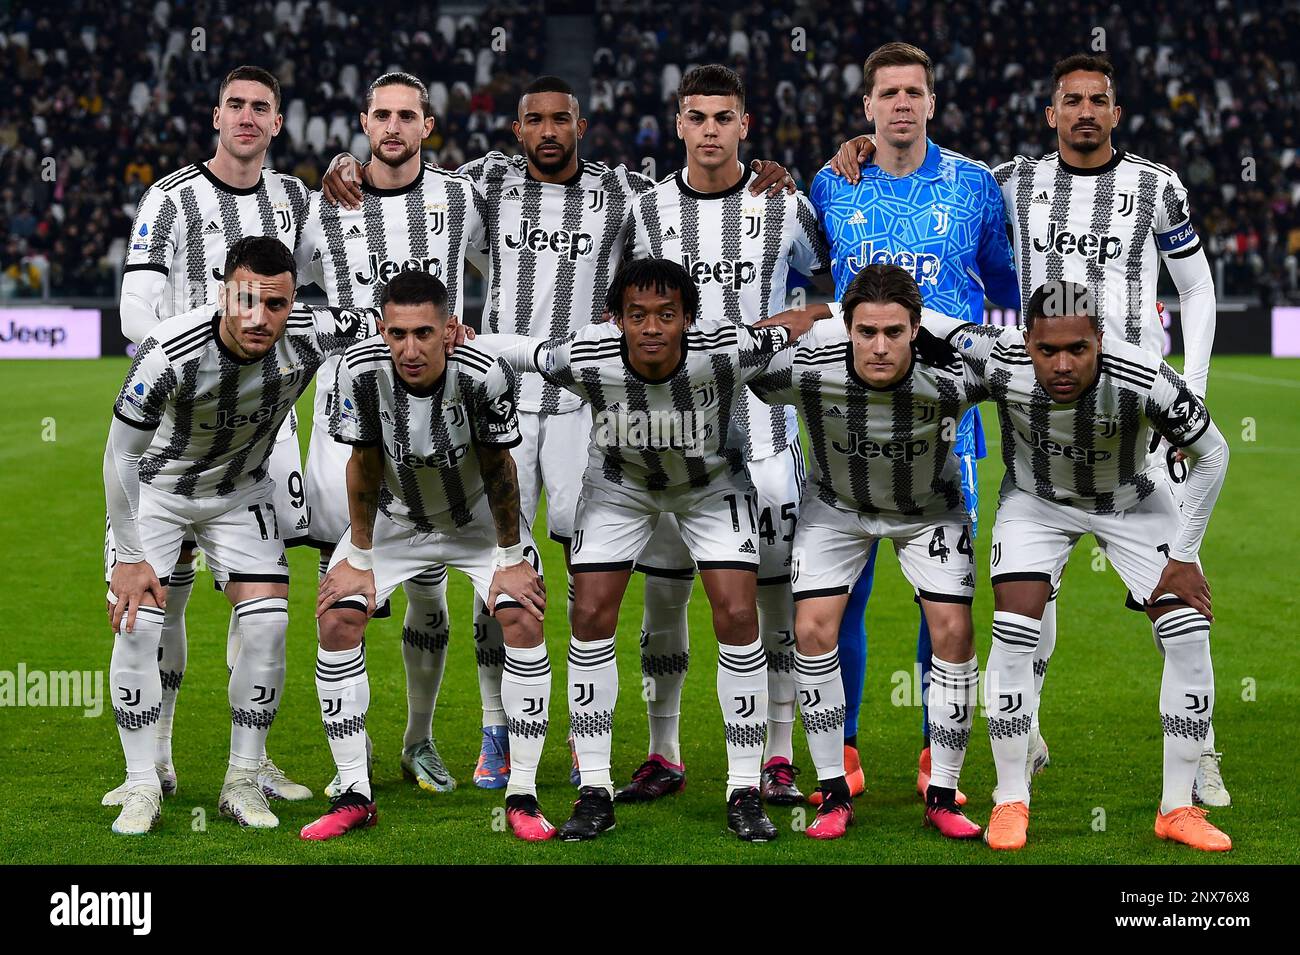 Turin, Italy. 28 February 2023. Players of Juventus FC pose for a tea photo  prior to the Serie A football match between Juventus FC and Torino FC.  Credit: Nicolò Campo/Alamy Live News